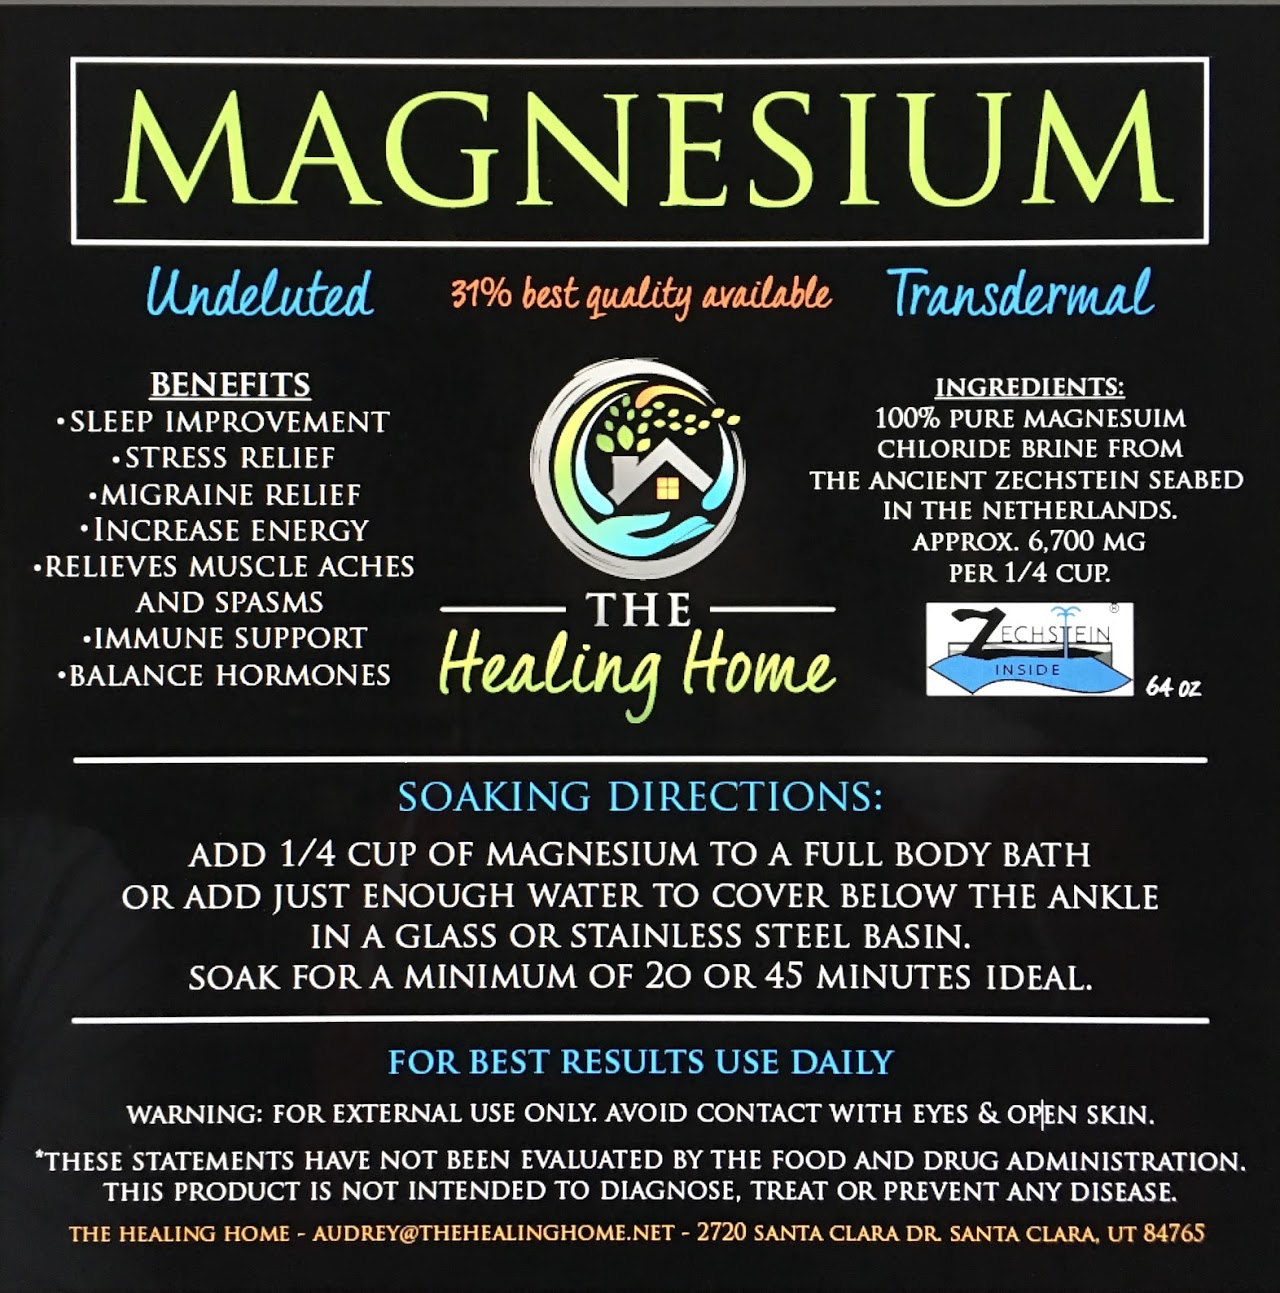 The Healing Body magnesium supplement label